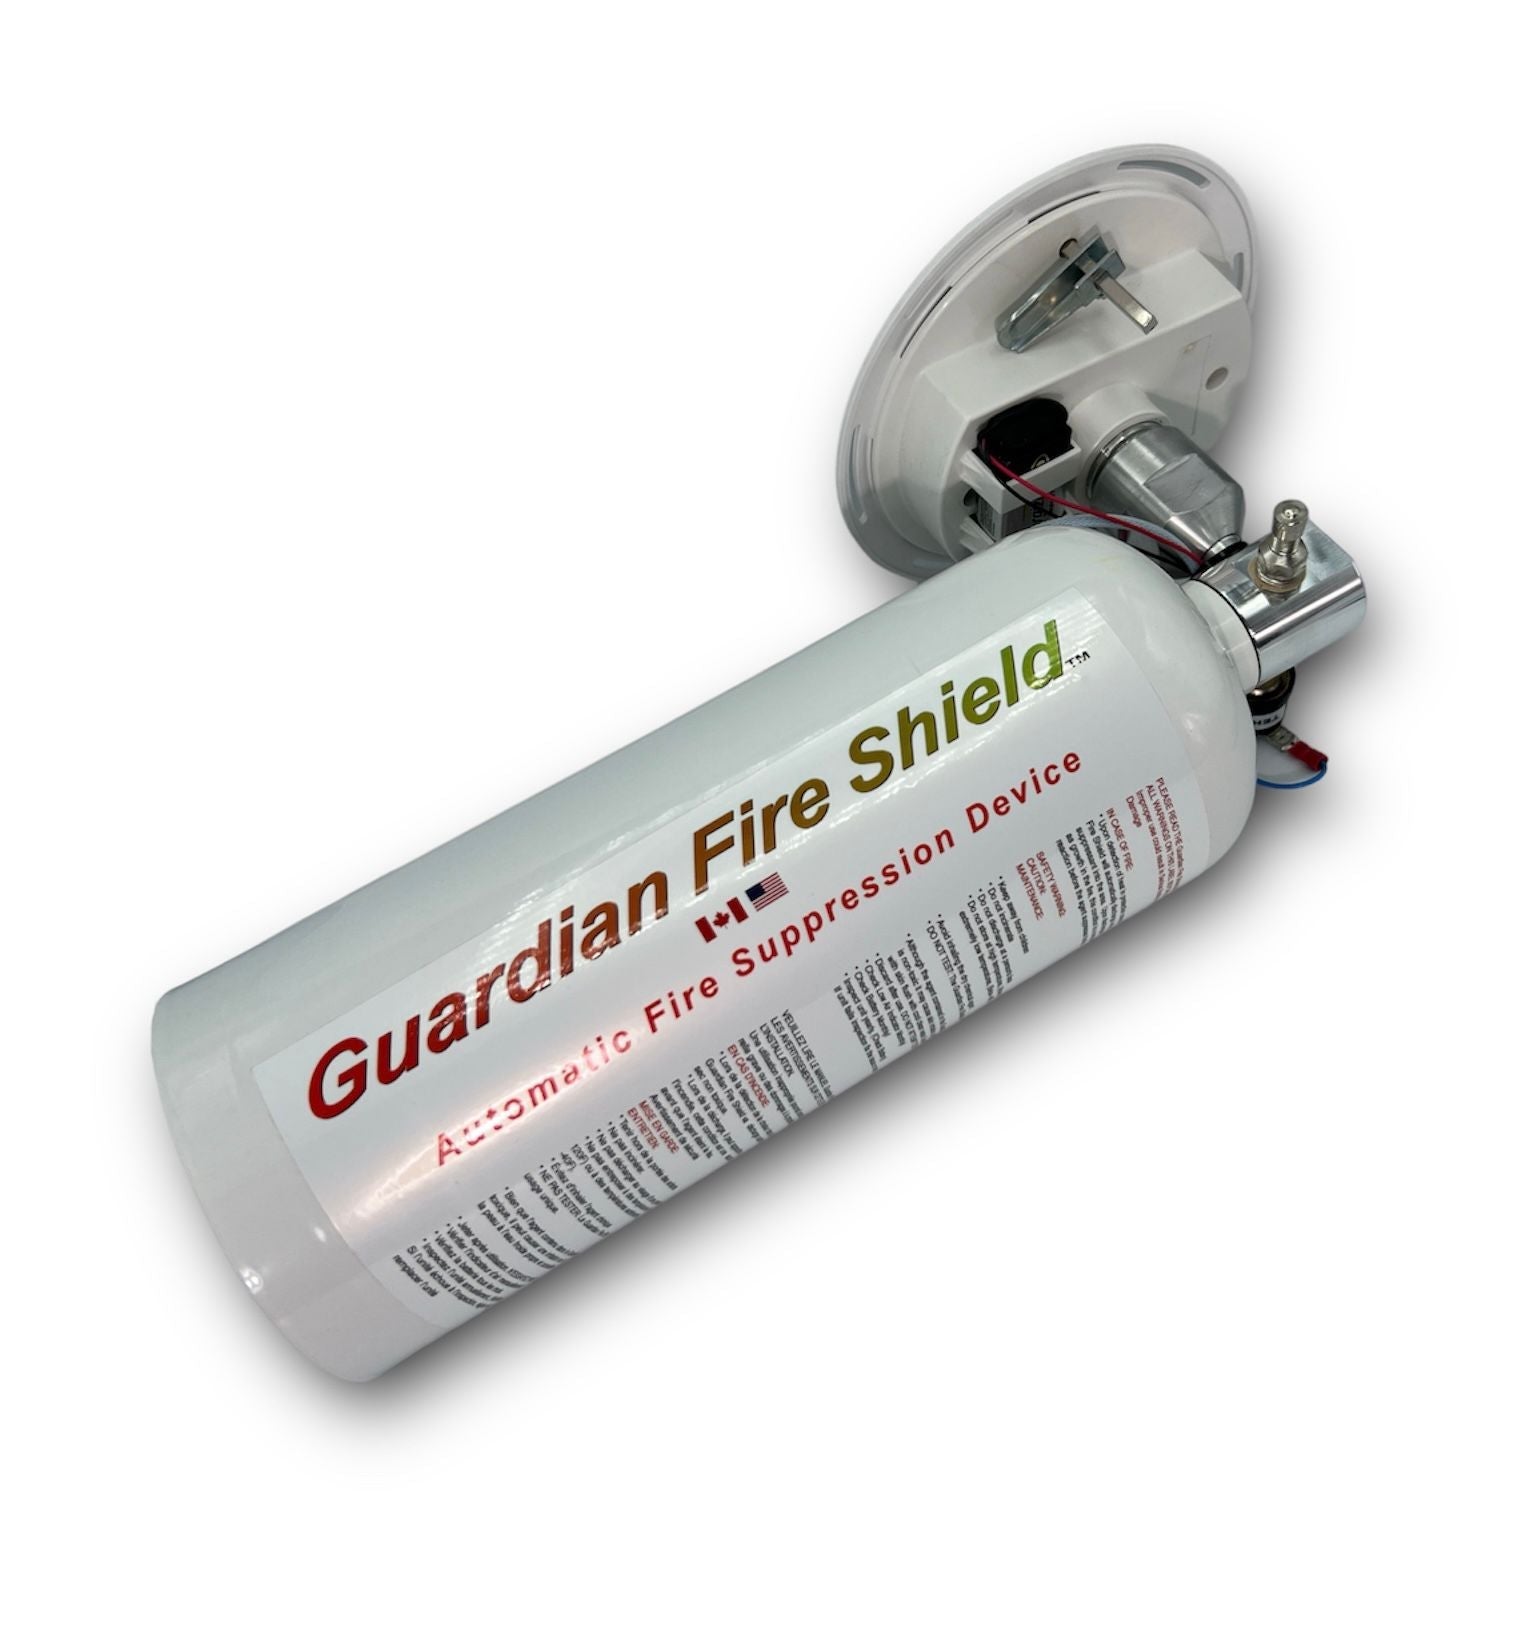 Guardian Fire Shield™ Automatic Fire Suppression Safety Device - Protect Your Space with Advanced Fire Safety Technology Guardian Fire Shield